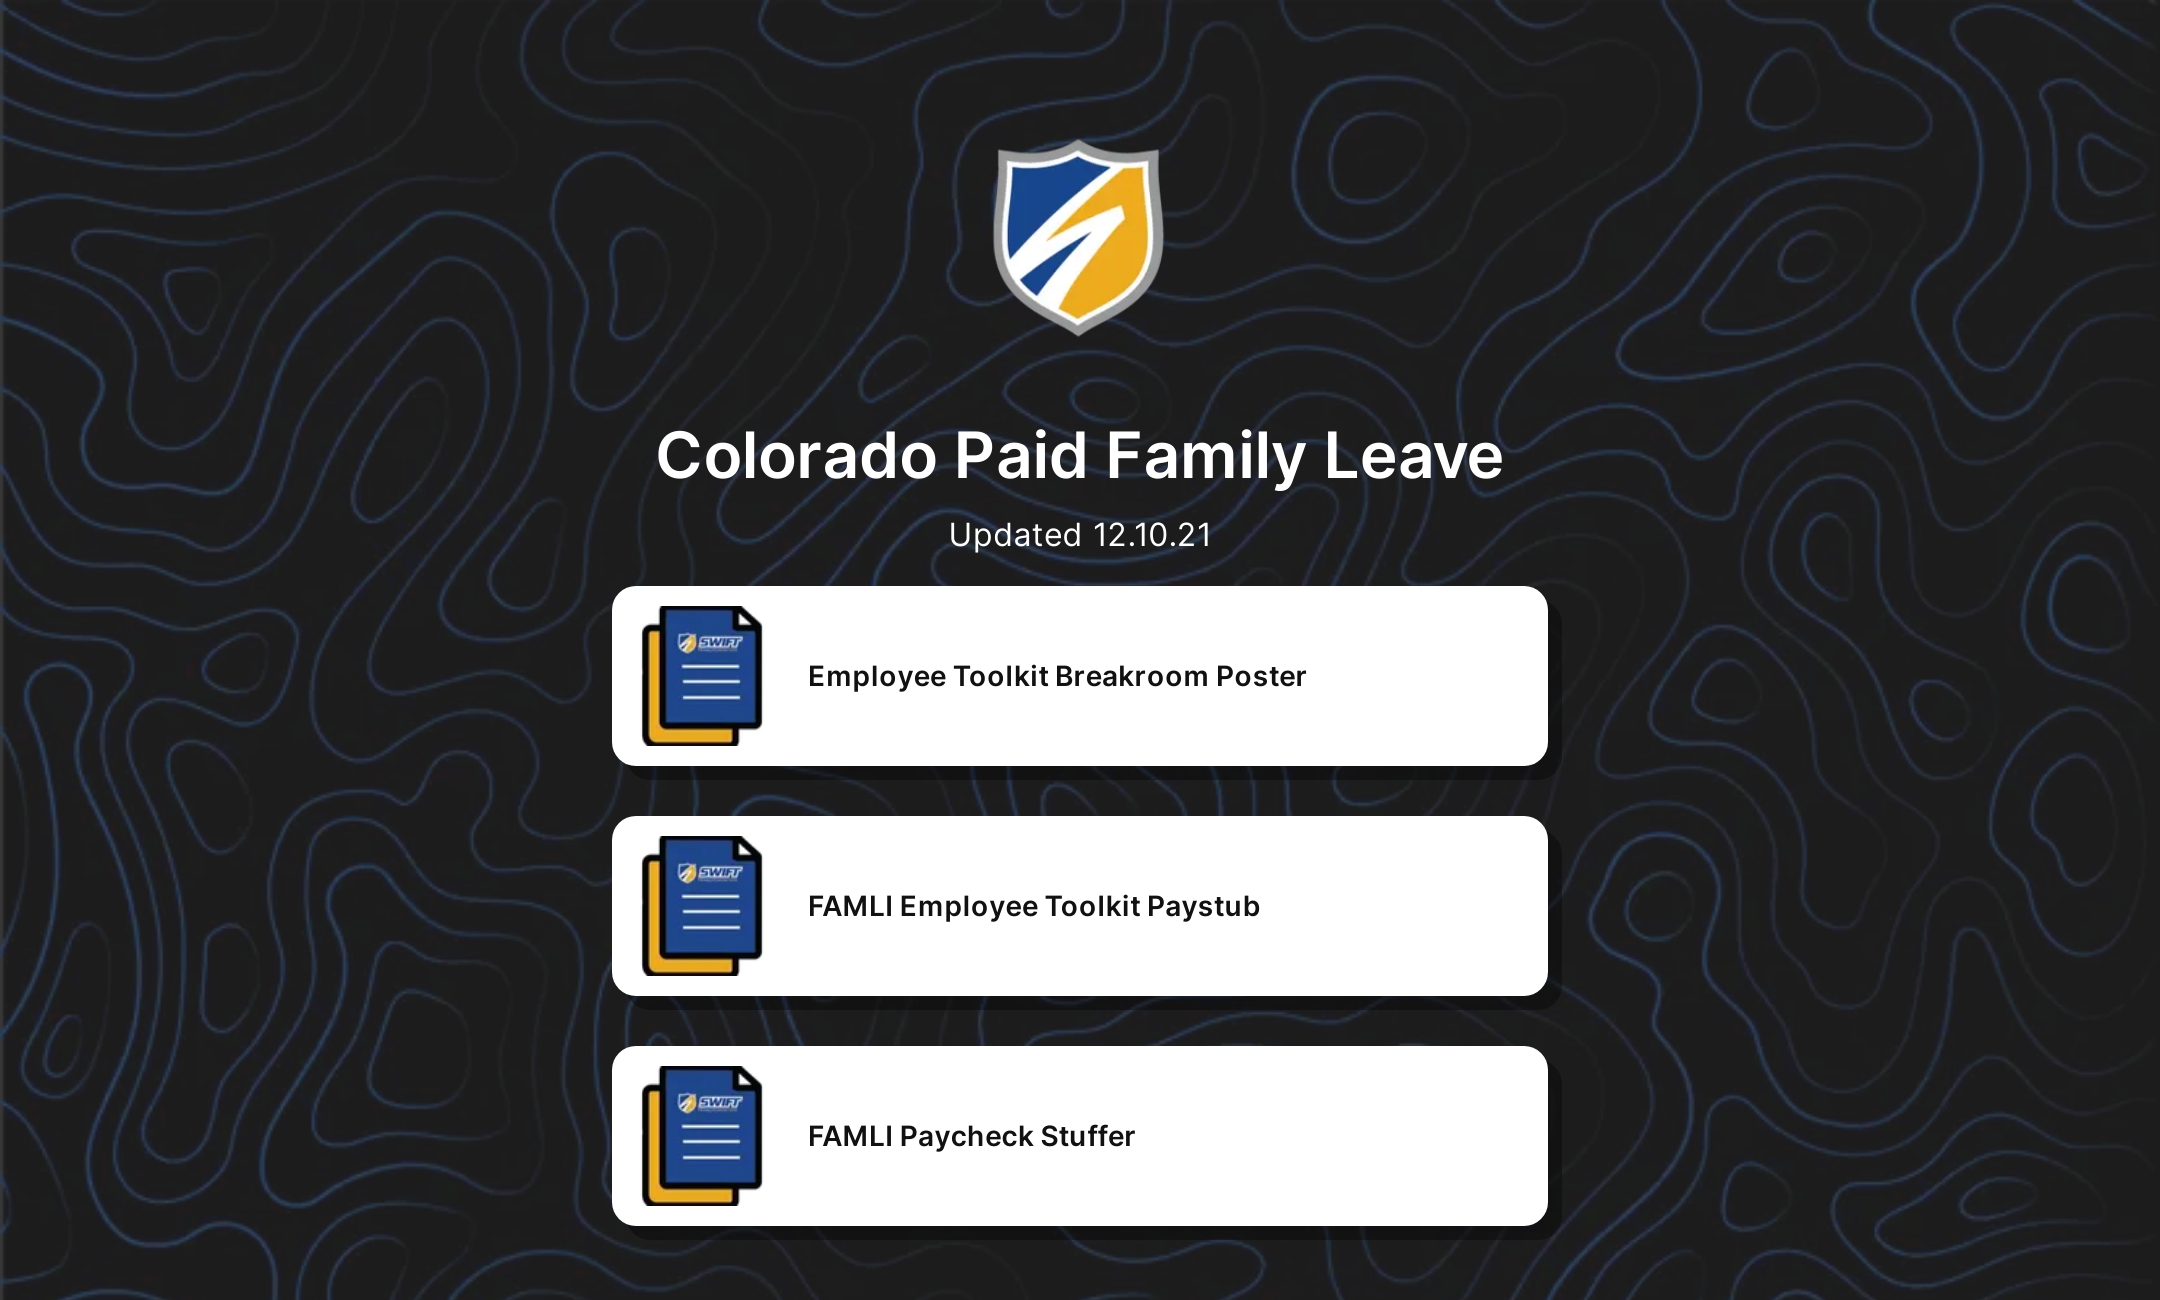 Colorado Paid Family Leave's Flowpage